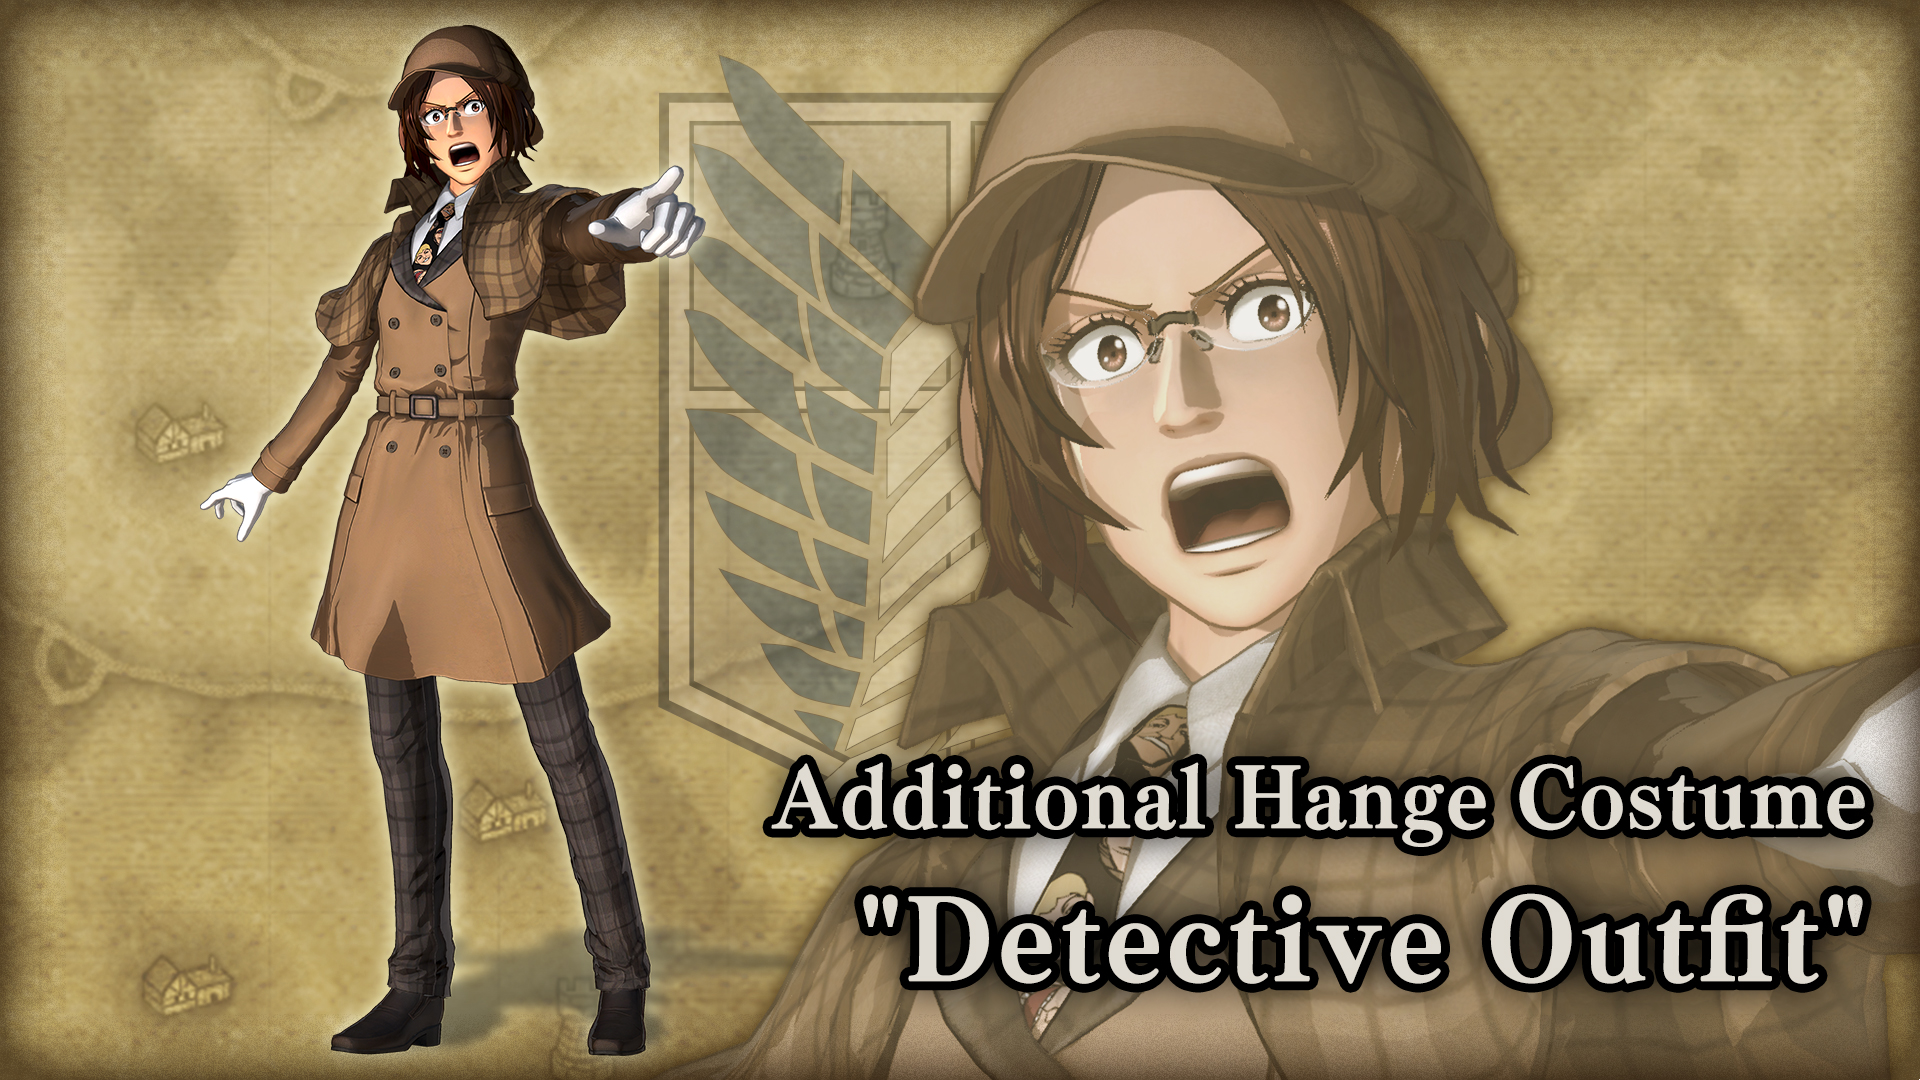 Additional Hange Costume: "Detective Outfit"